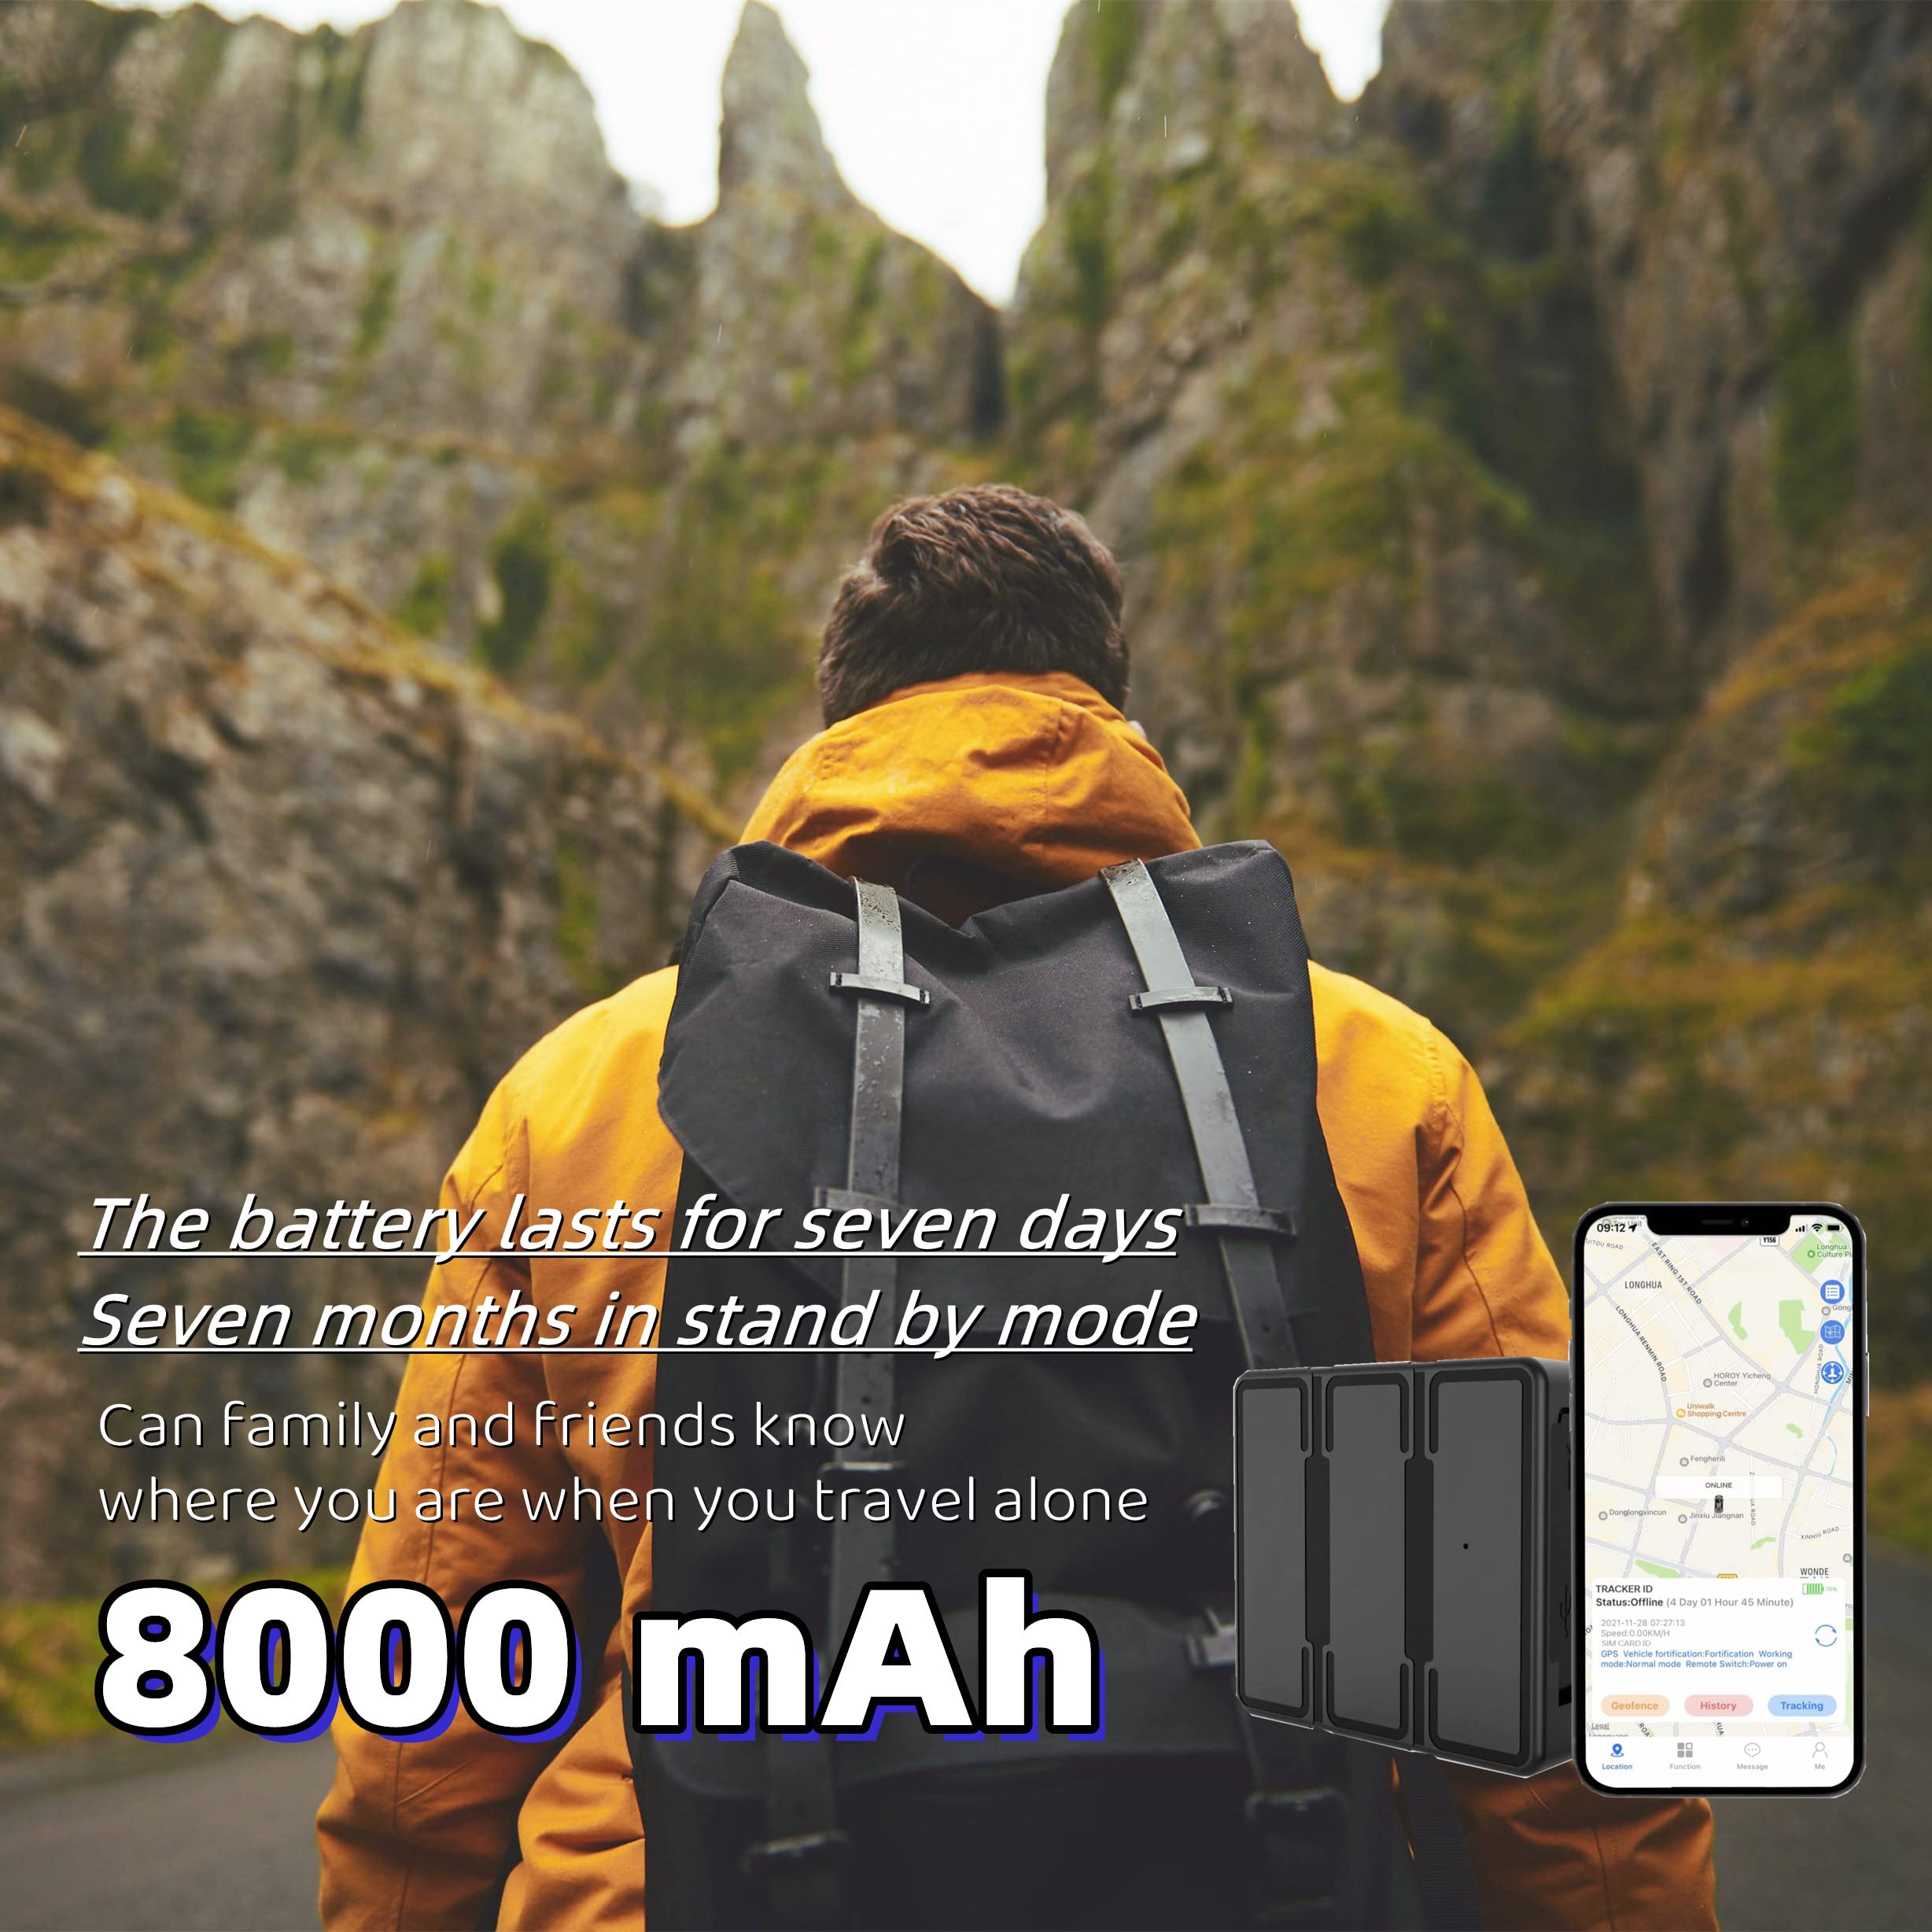 GPS Tracker for Vehicle, Car, Kids, Dogs, Motorcycle,8000mAh Rechargeable Battery 4g GPS Tracker,Geo-Fence,Remote Anti Theft 10S Instant Updates Full Global Coverage Monthly Fee Required